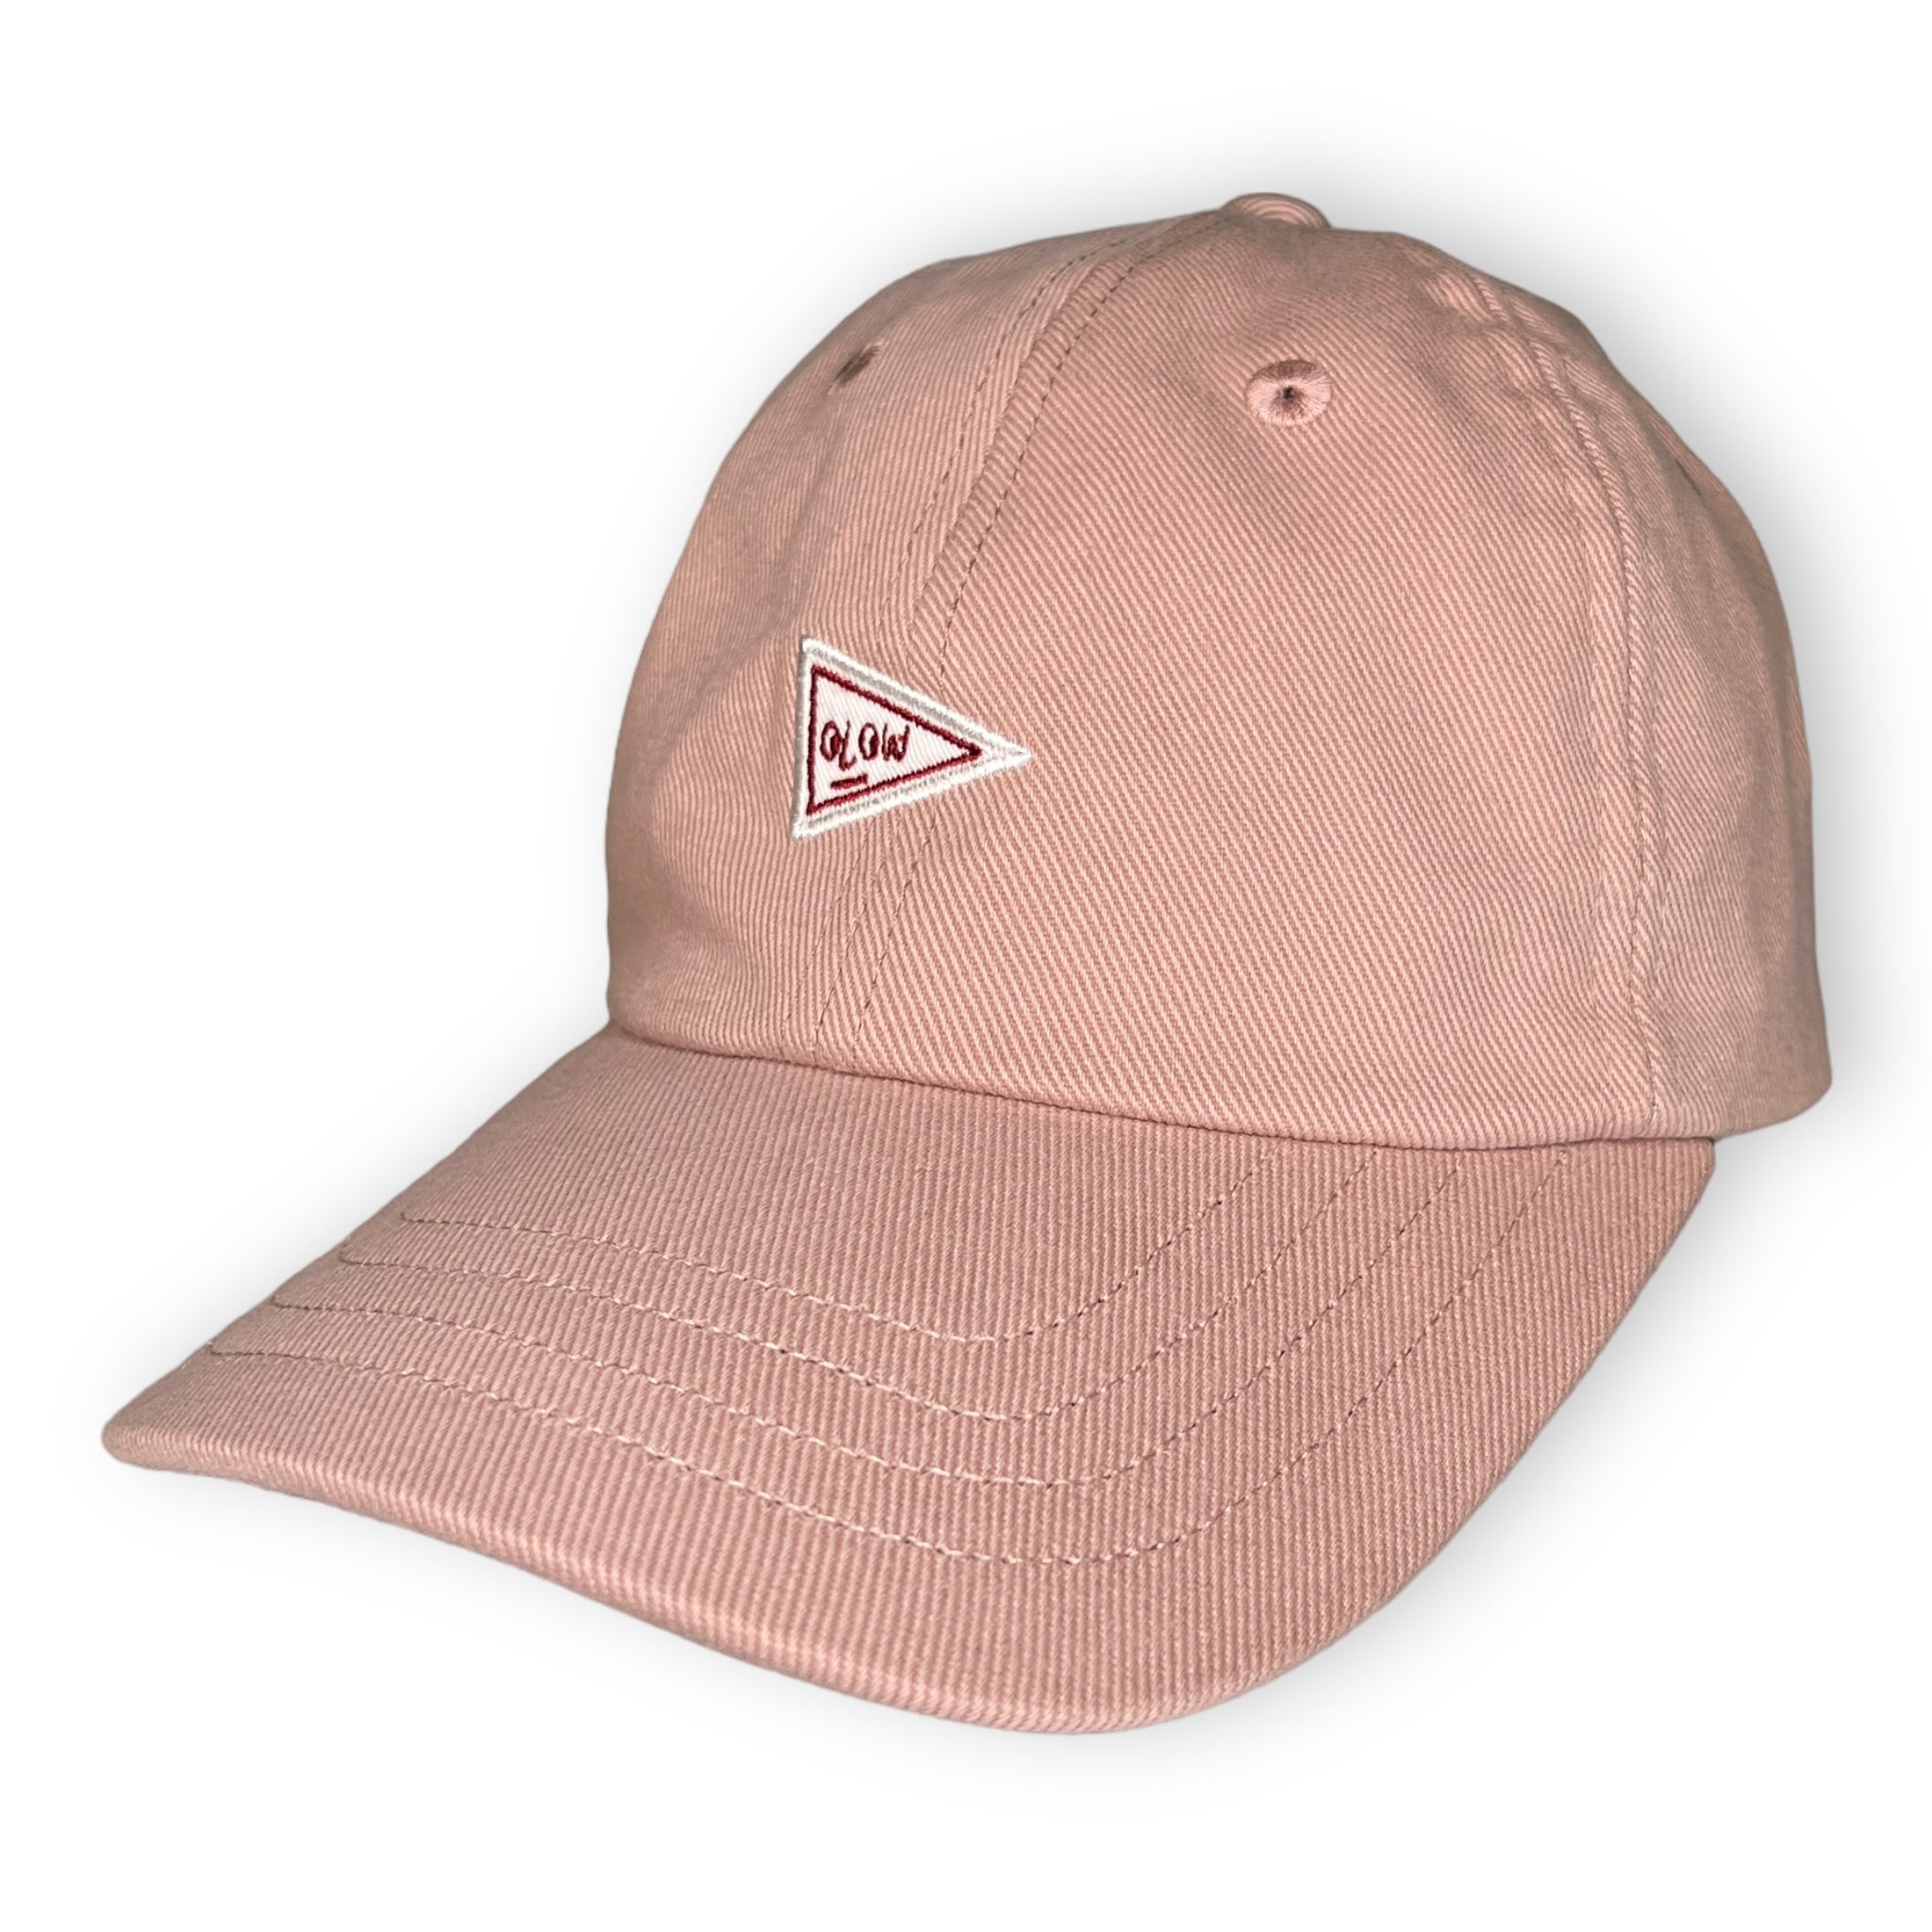 Olow Casquette Six Panel rose